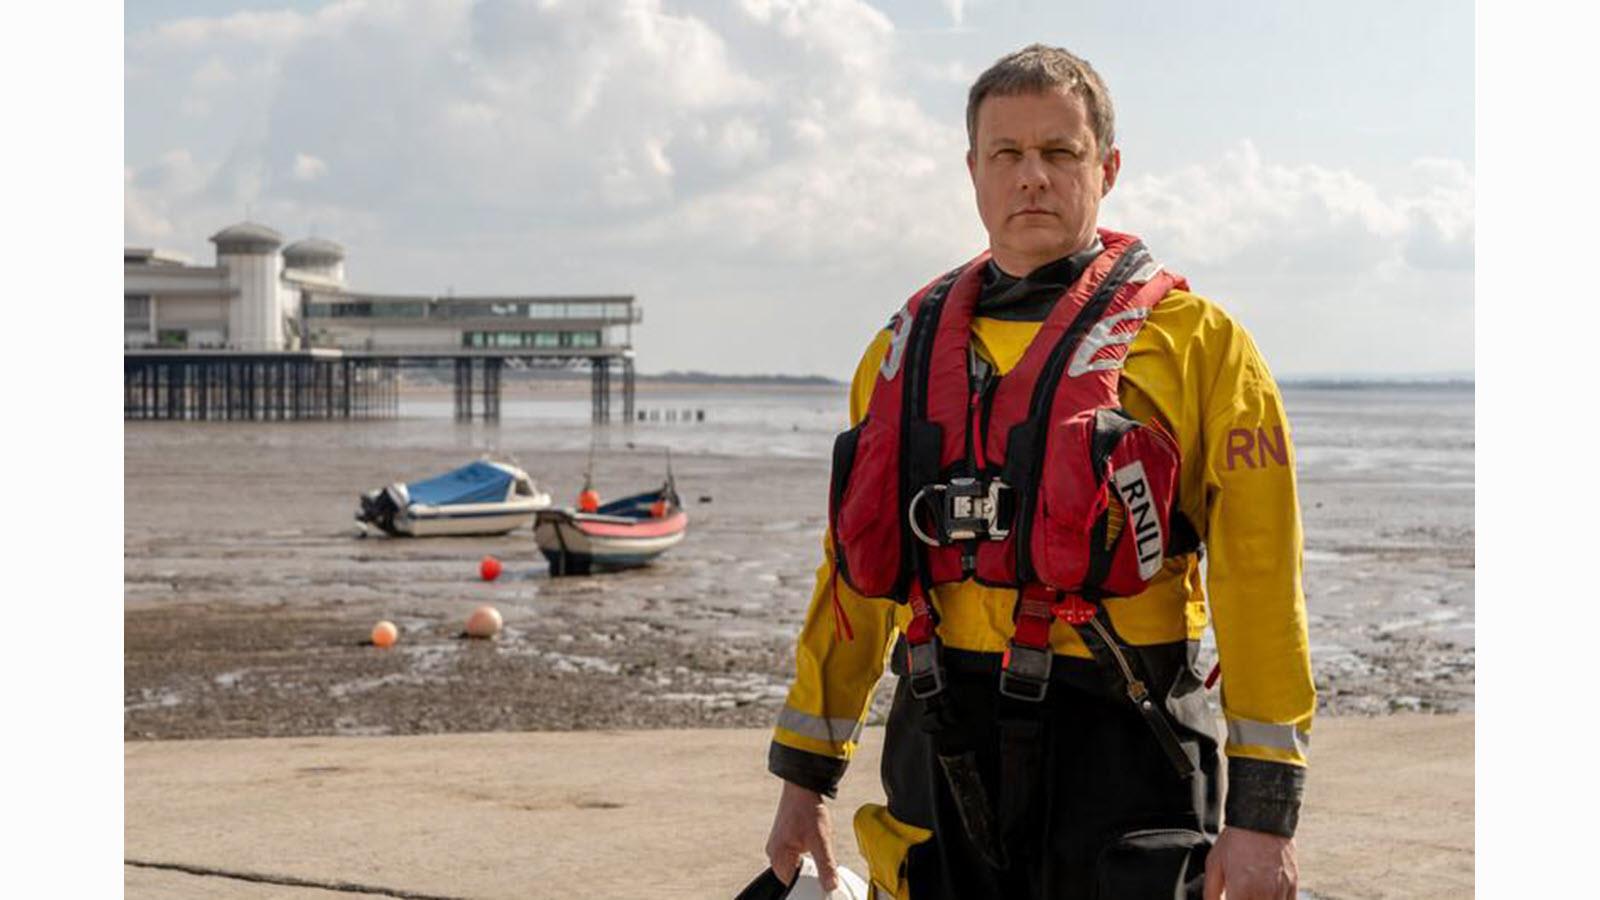 Mike Buckland, waterside, in gear for doing water rescues